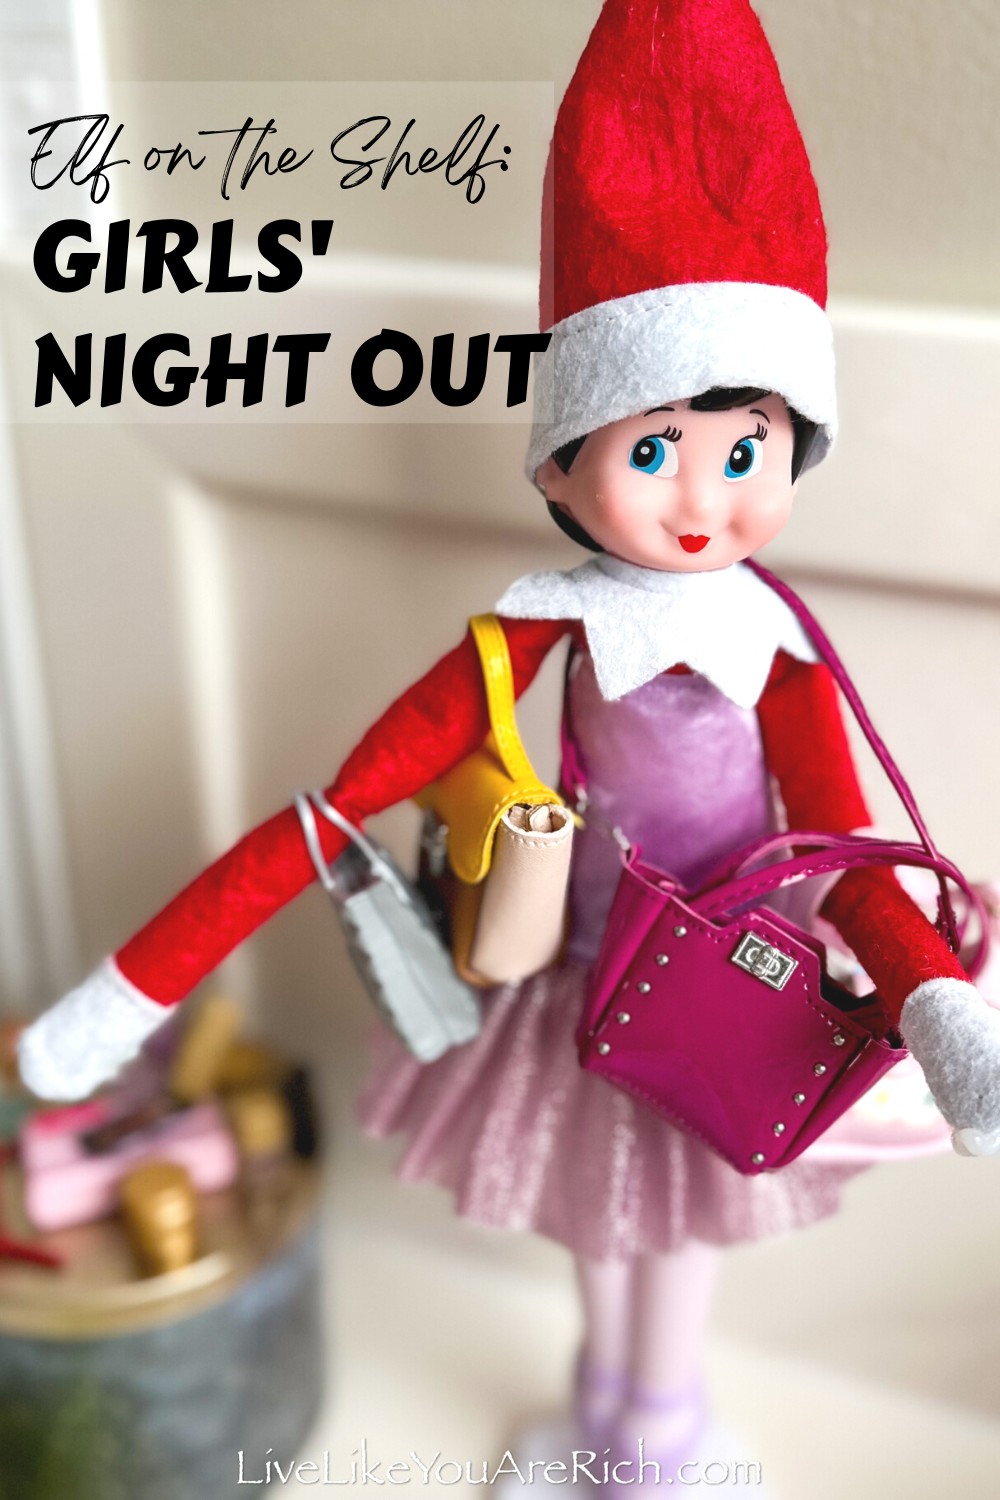 Elf on the Shelf: Girls' Night Out